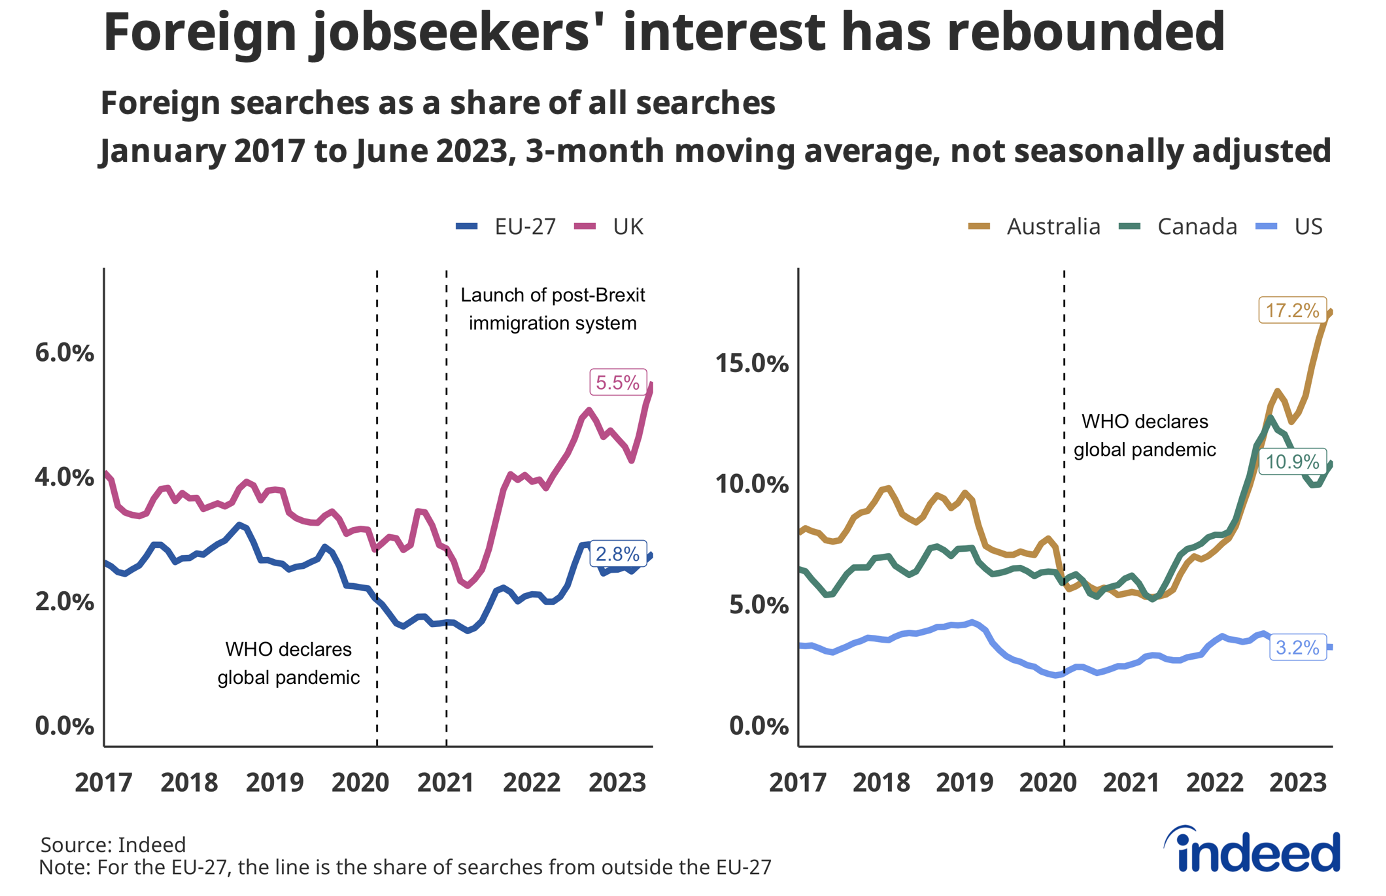 A pair of line graphs titled "Foreign jobseekers' interest has rebounded" showing foreign searches as a share of all searches from January 2017 to June 2023. The UK number sits at 5.5% as of June, with EU-27 trailing at 2.8%, while Australia has spiked to 17.2%, Canada at 10.9%, and the US at 3.2% during that same time period. 